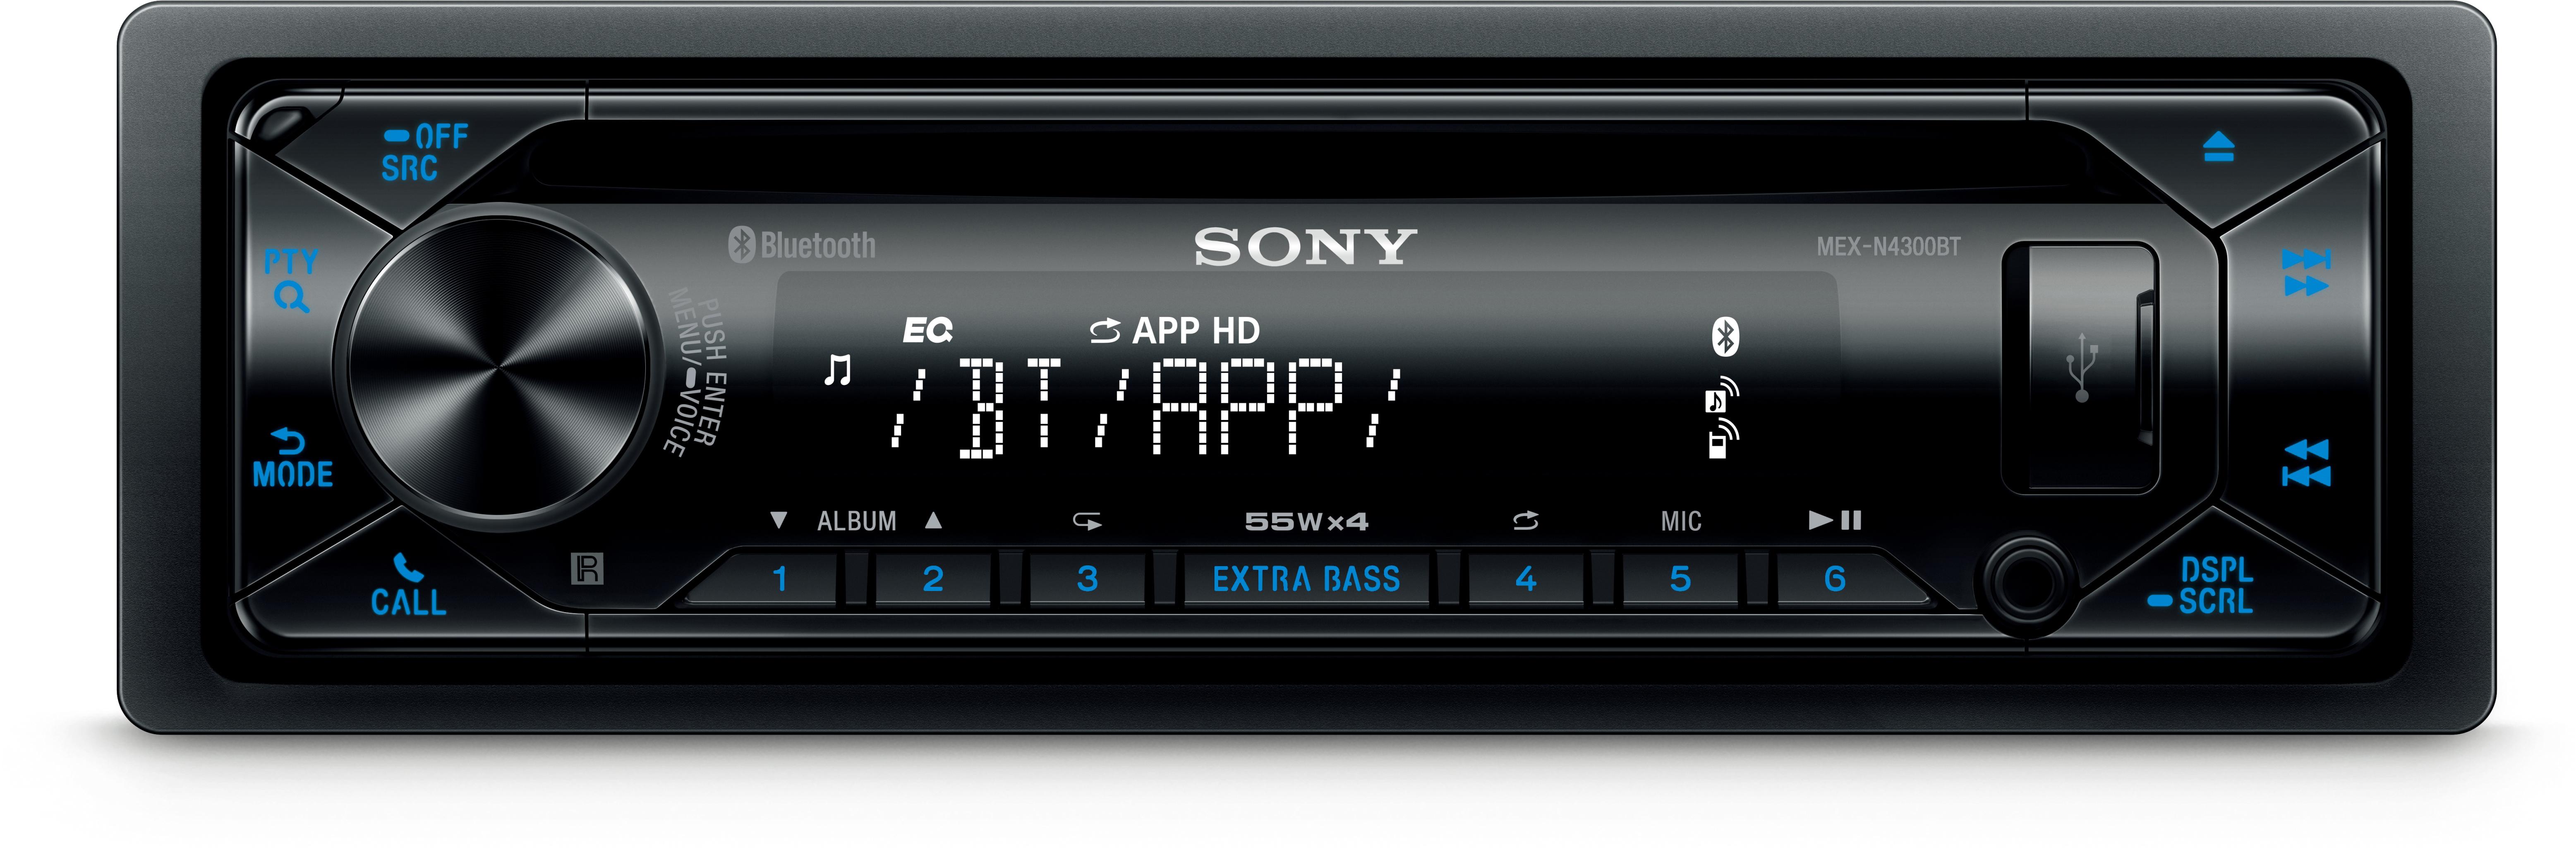 Sony Mex-N4300Bt Car Stereo With Dual Bluetooth Connectivity